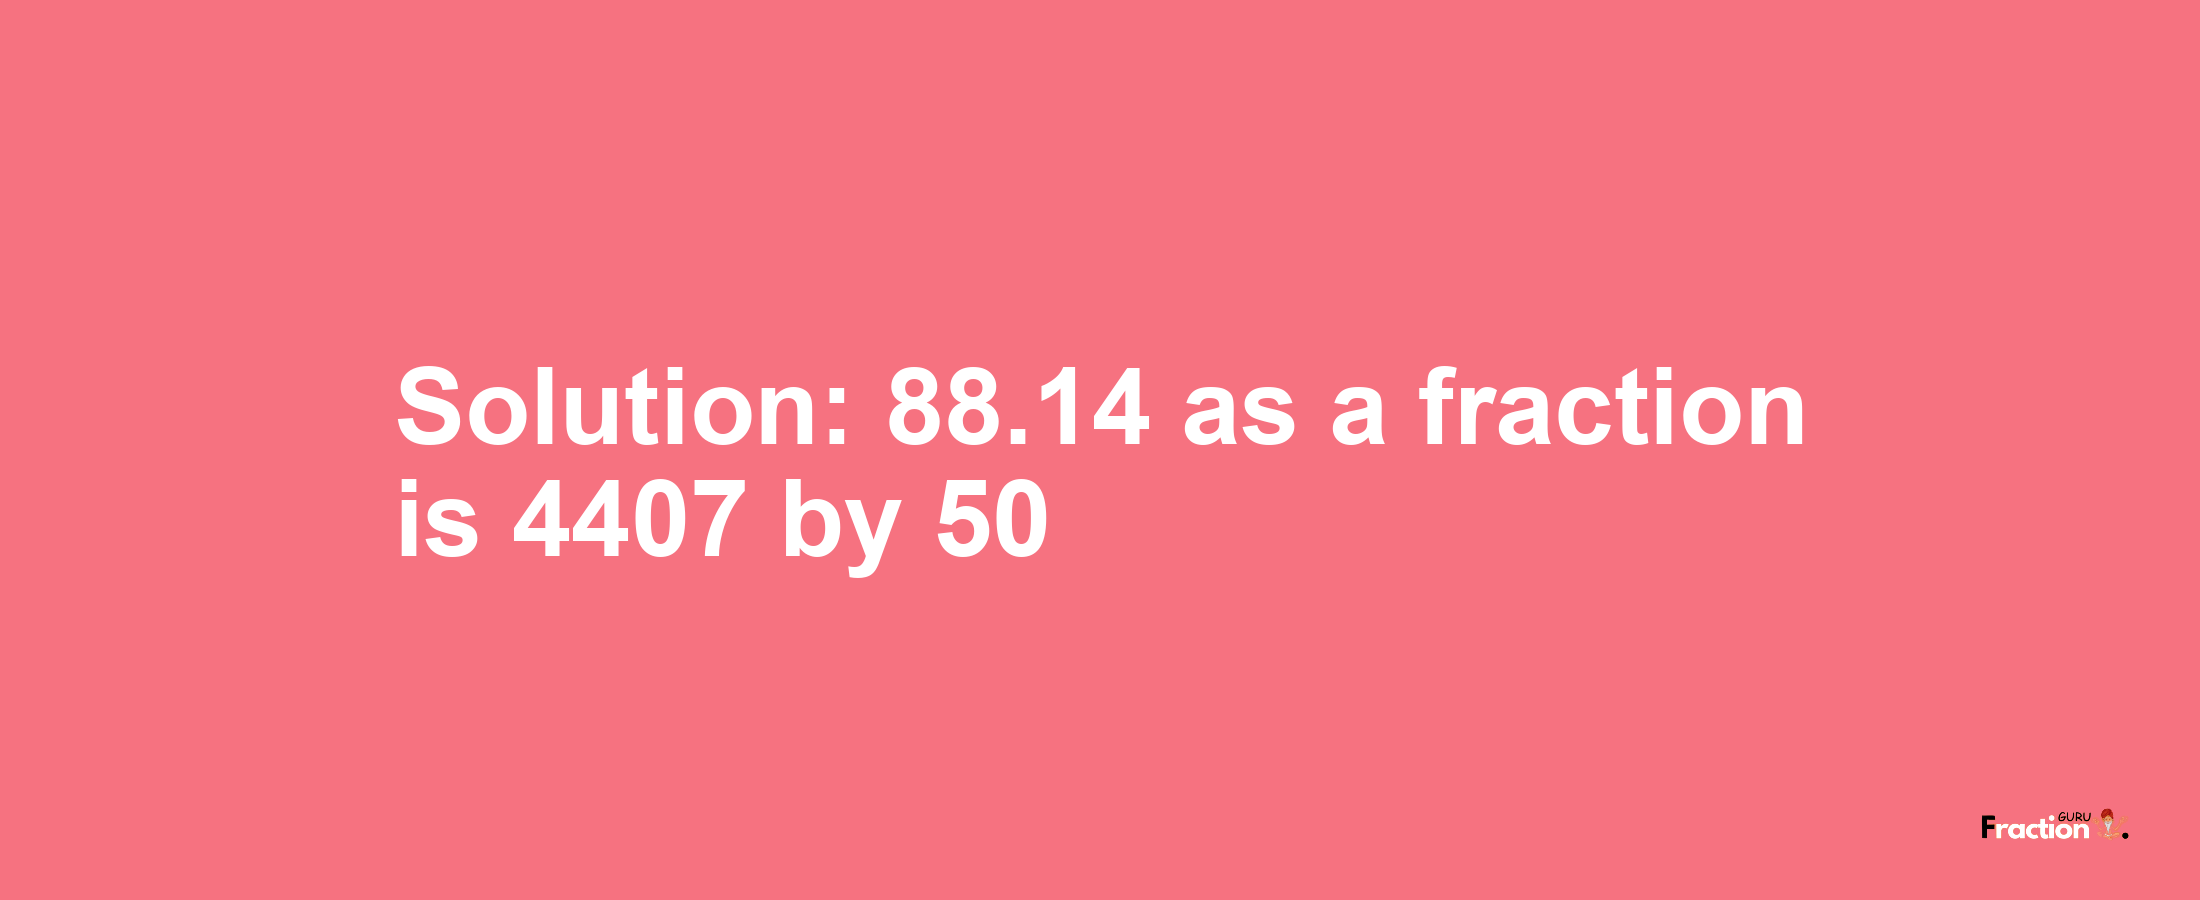 Solution:88.14 as a fraction is 4407/50